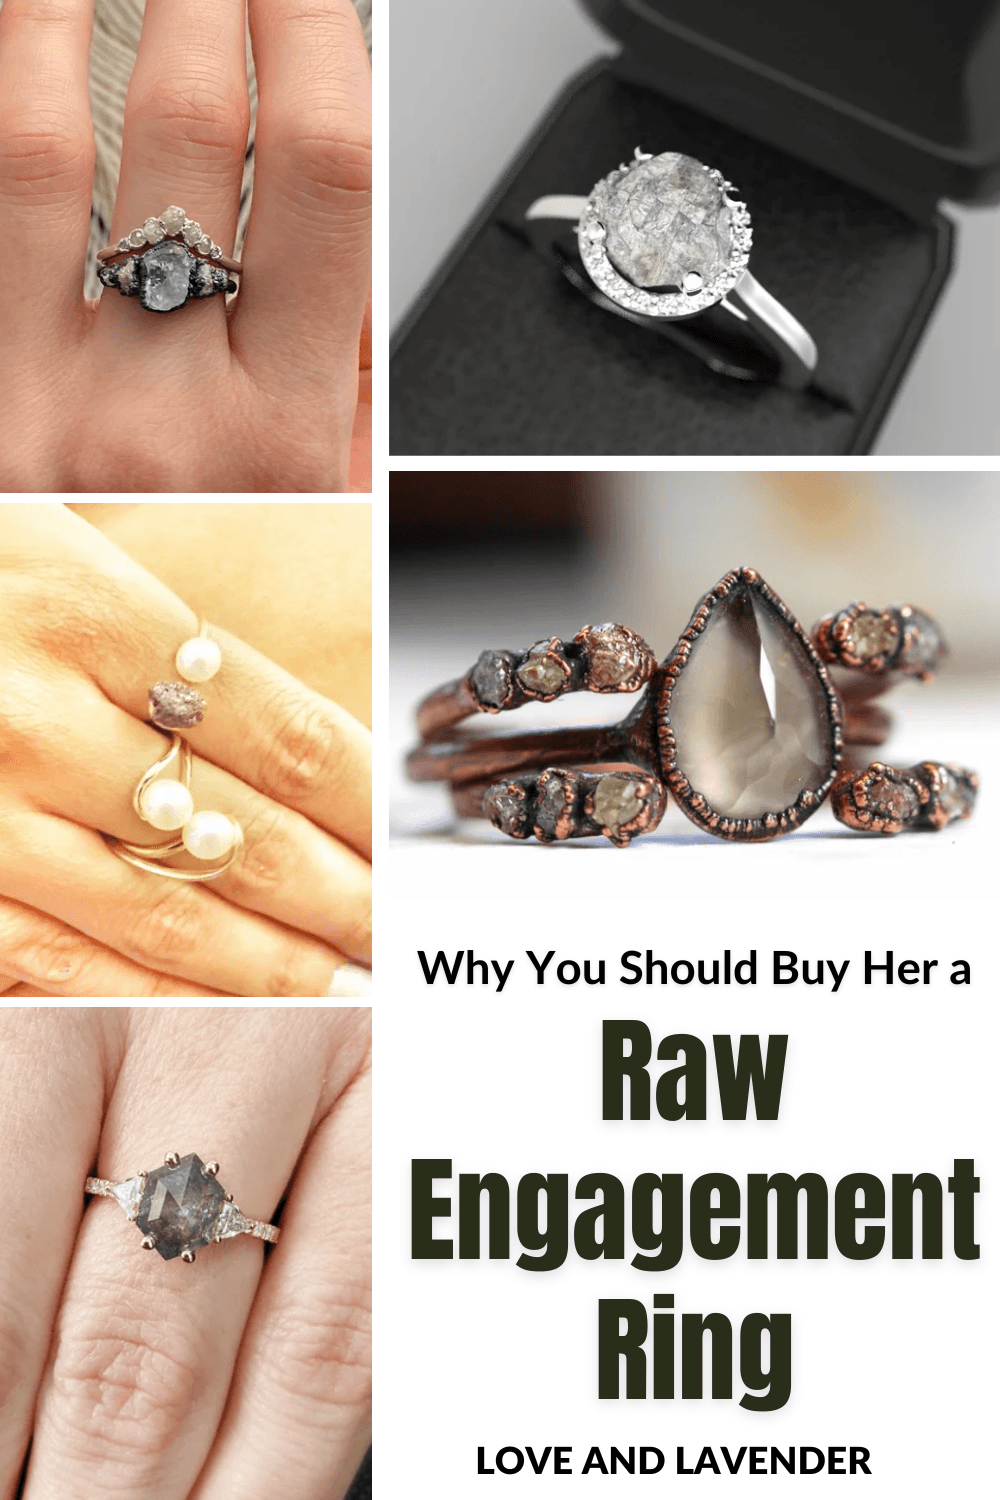 15 Raw Diamond Engagement Rings as a Beautiful Budget Ring Option